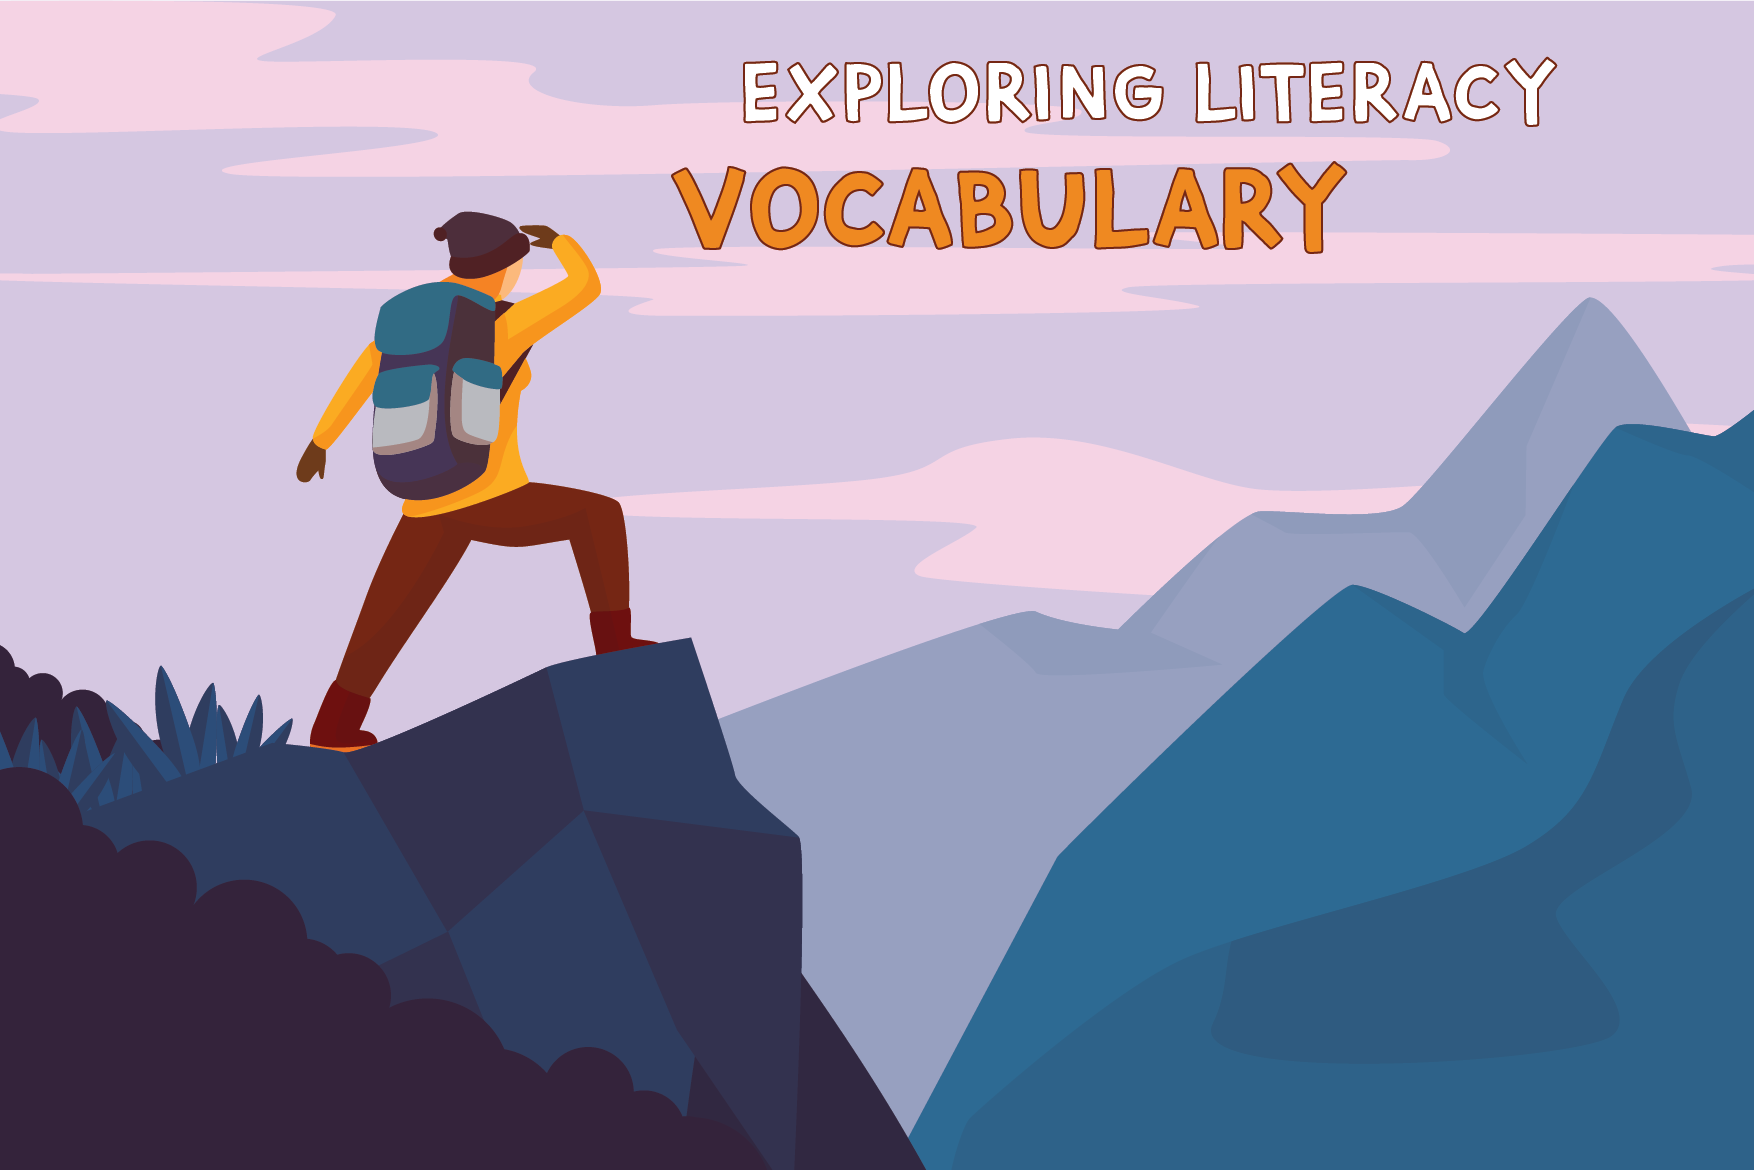 Cartoon hiker standing on peak staring out across mountains - Exploring Literacy course logo